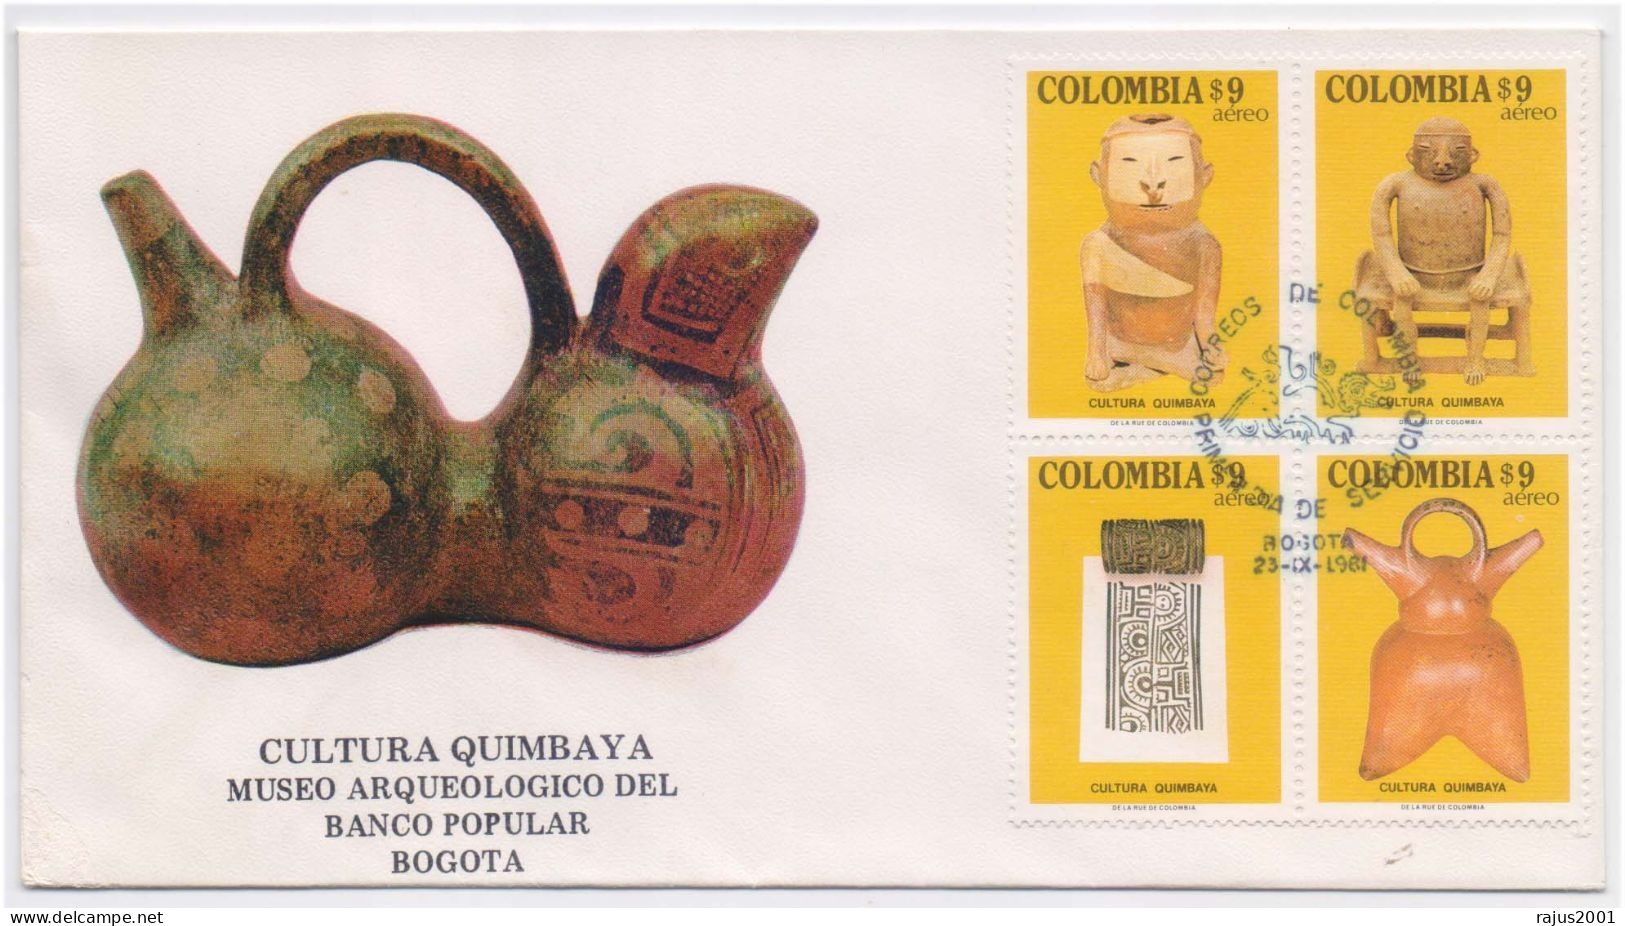 Culture Quimbaya, Archaeological Museum, Archaeology, Indigenous Indian Handicrafts, Sculpture, Colombia FDC - Archaeology